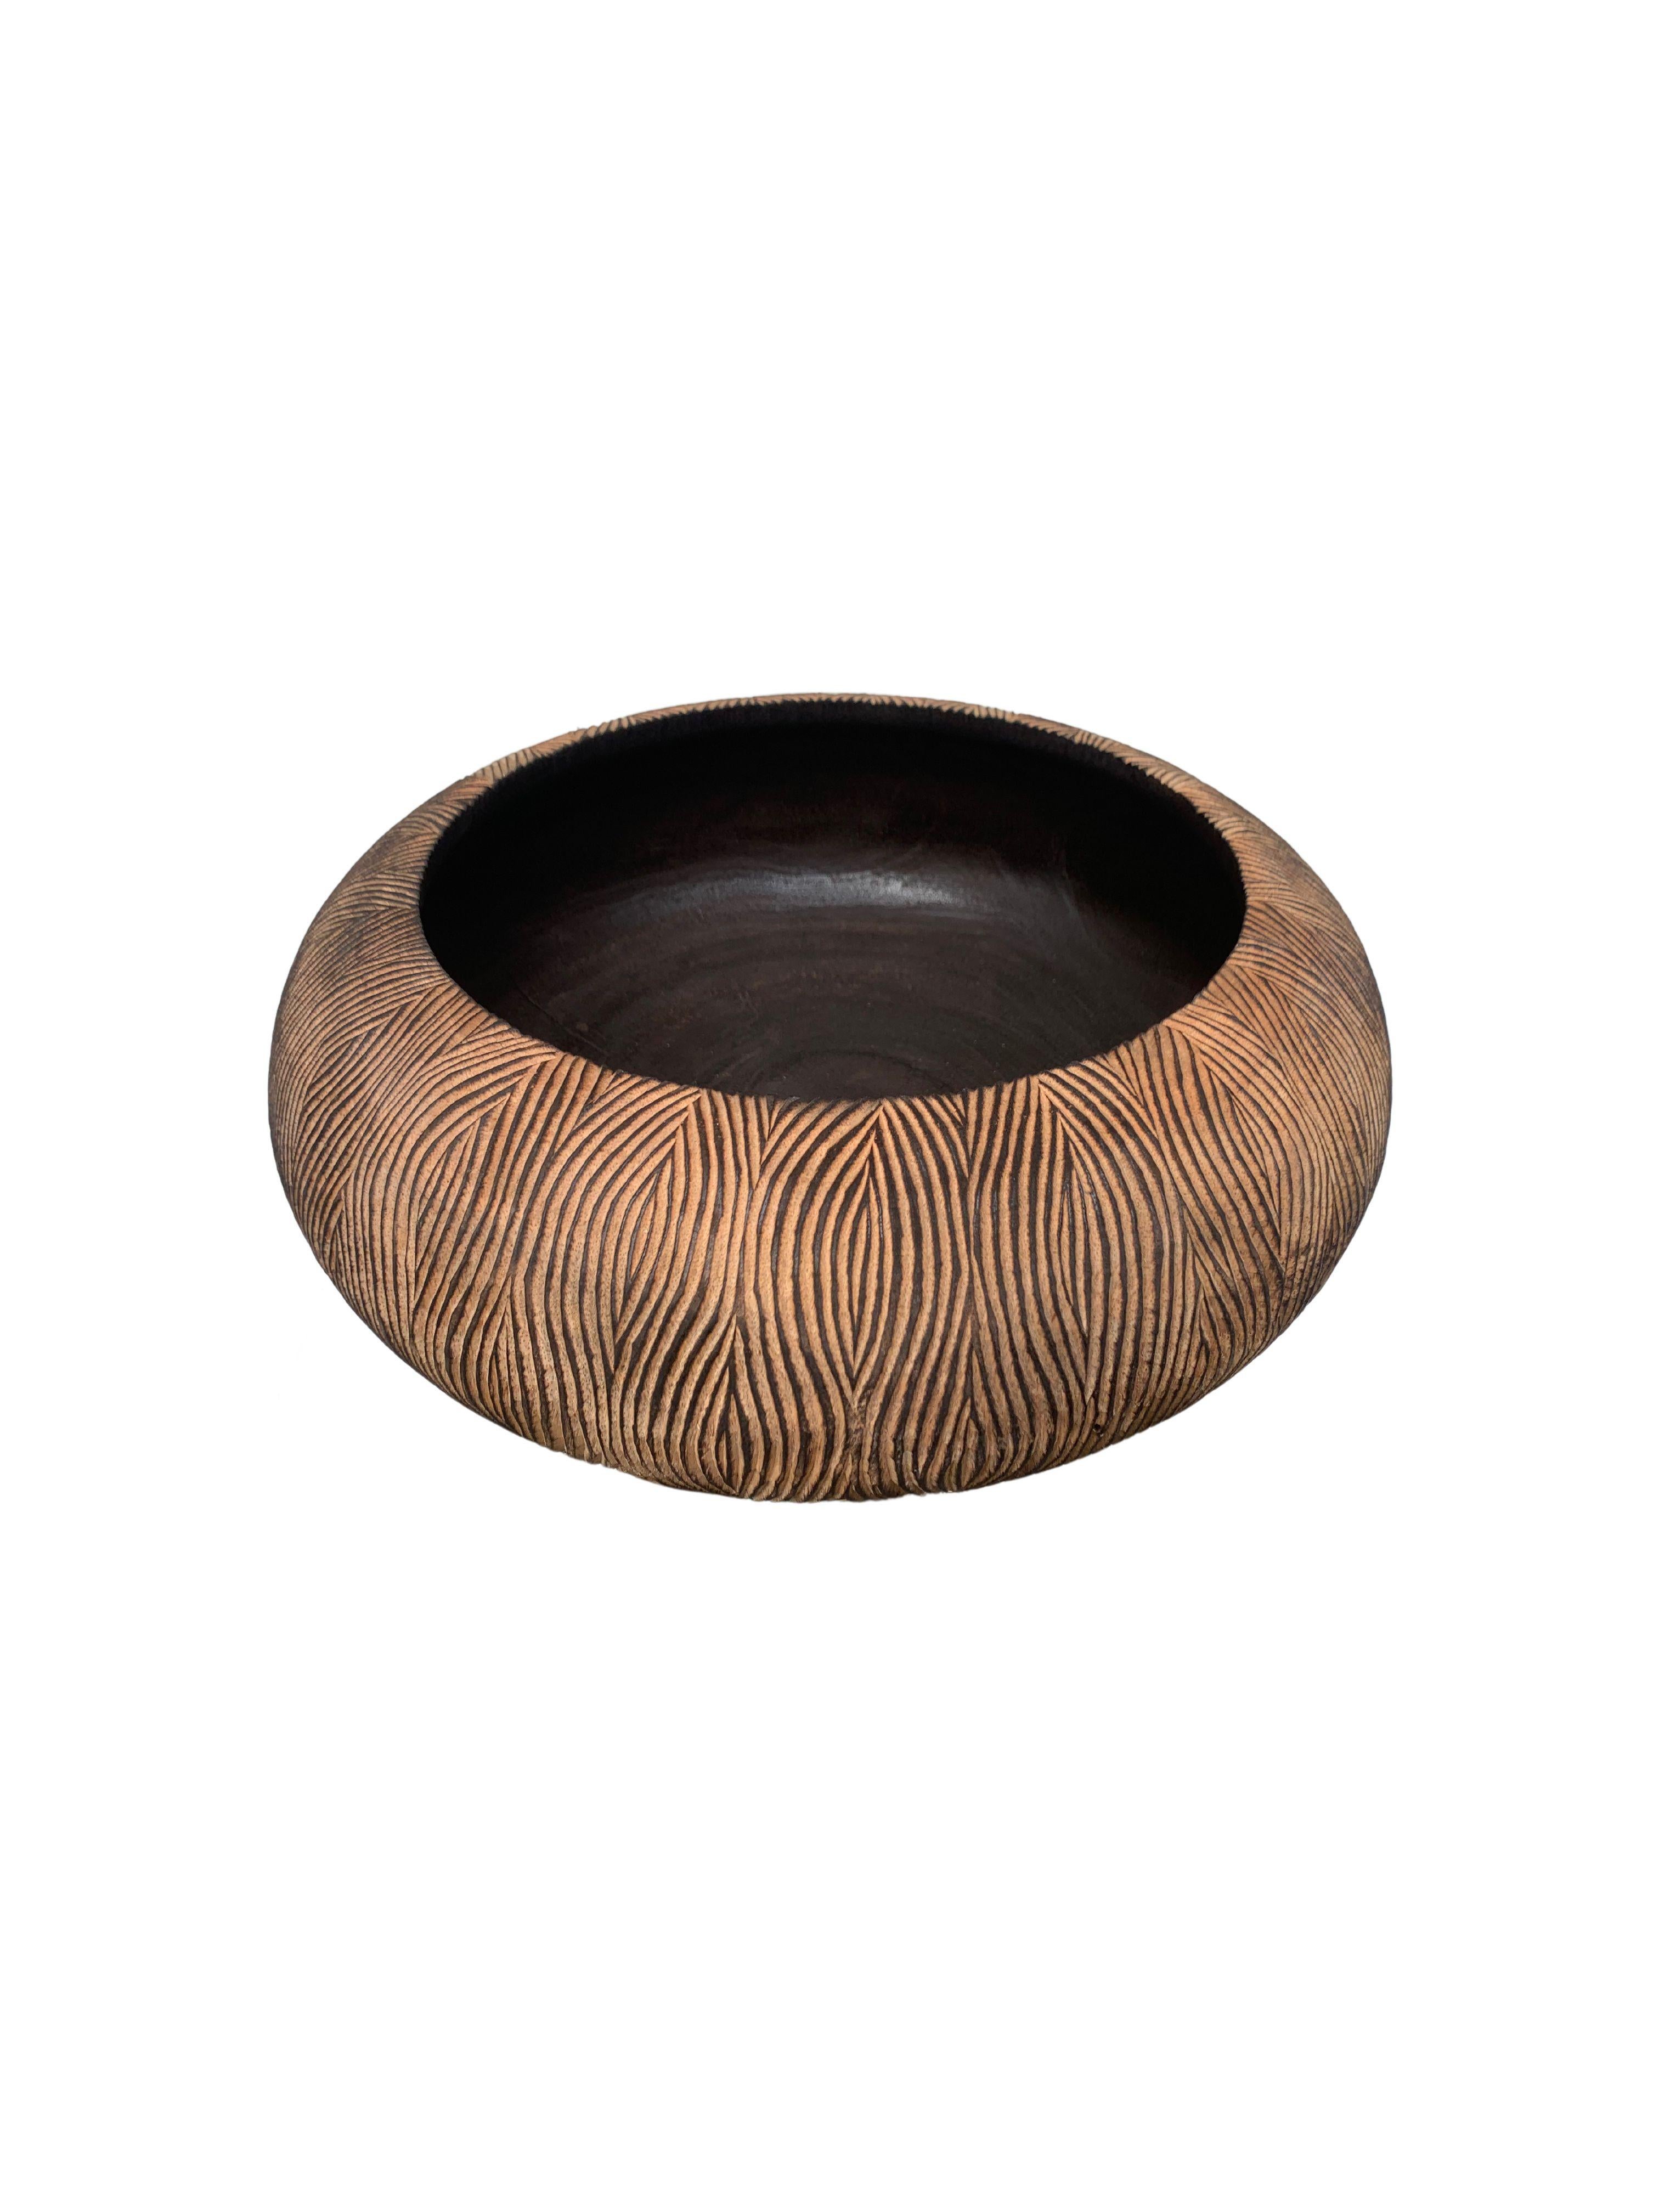 A hand-crafted mango wood bowl. The bowl was cut from a much larger slab of mango wood and features a hand carved texture on its sides. This bowl was burnt three times to achieve its rich black colour present in its basin. The exterior was then